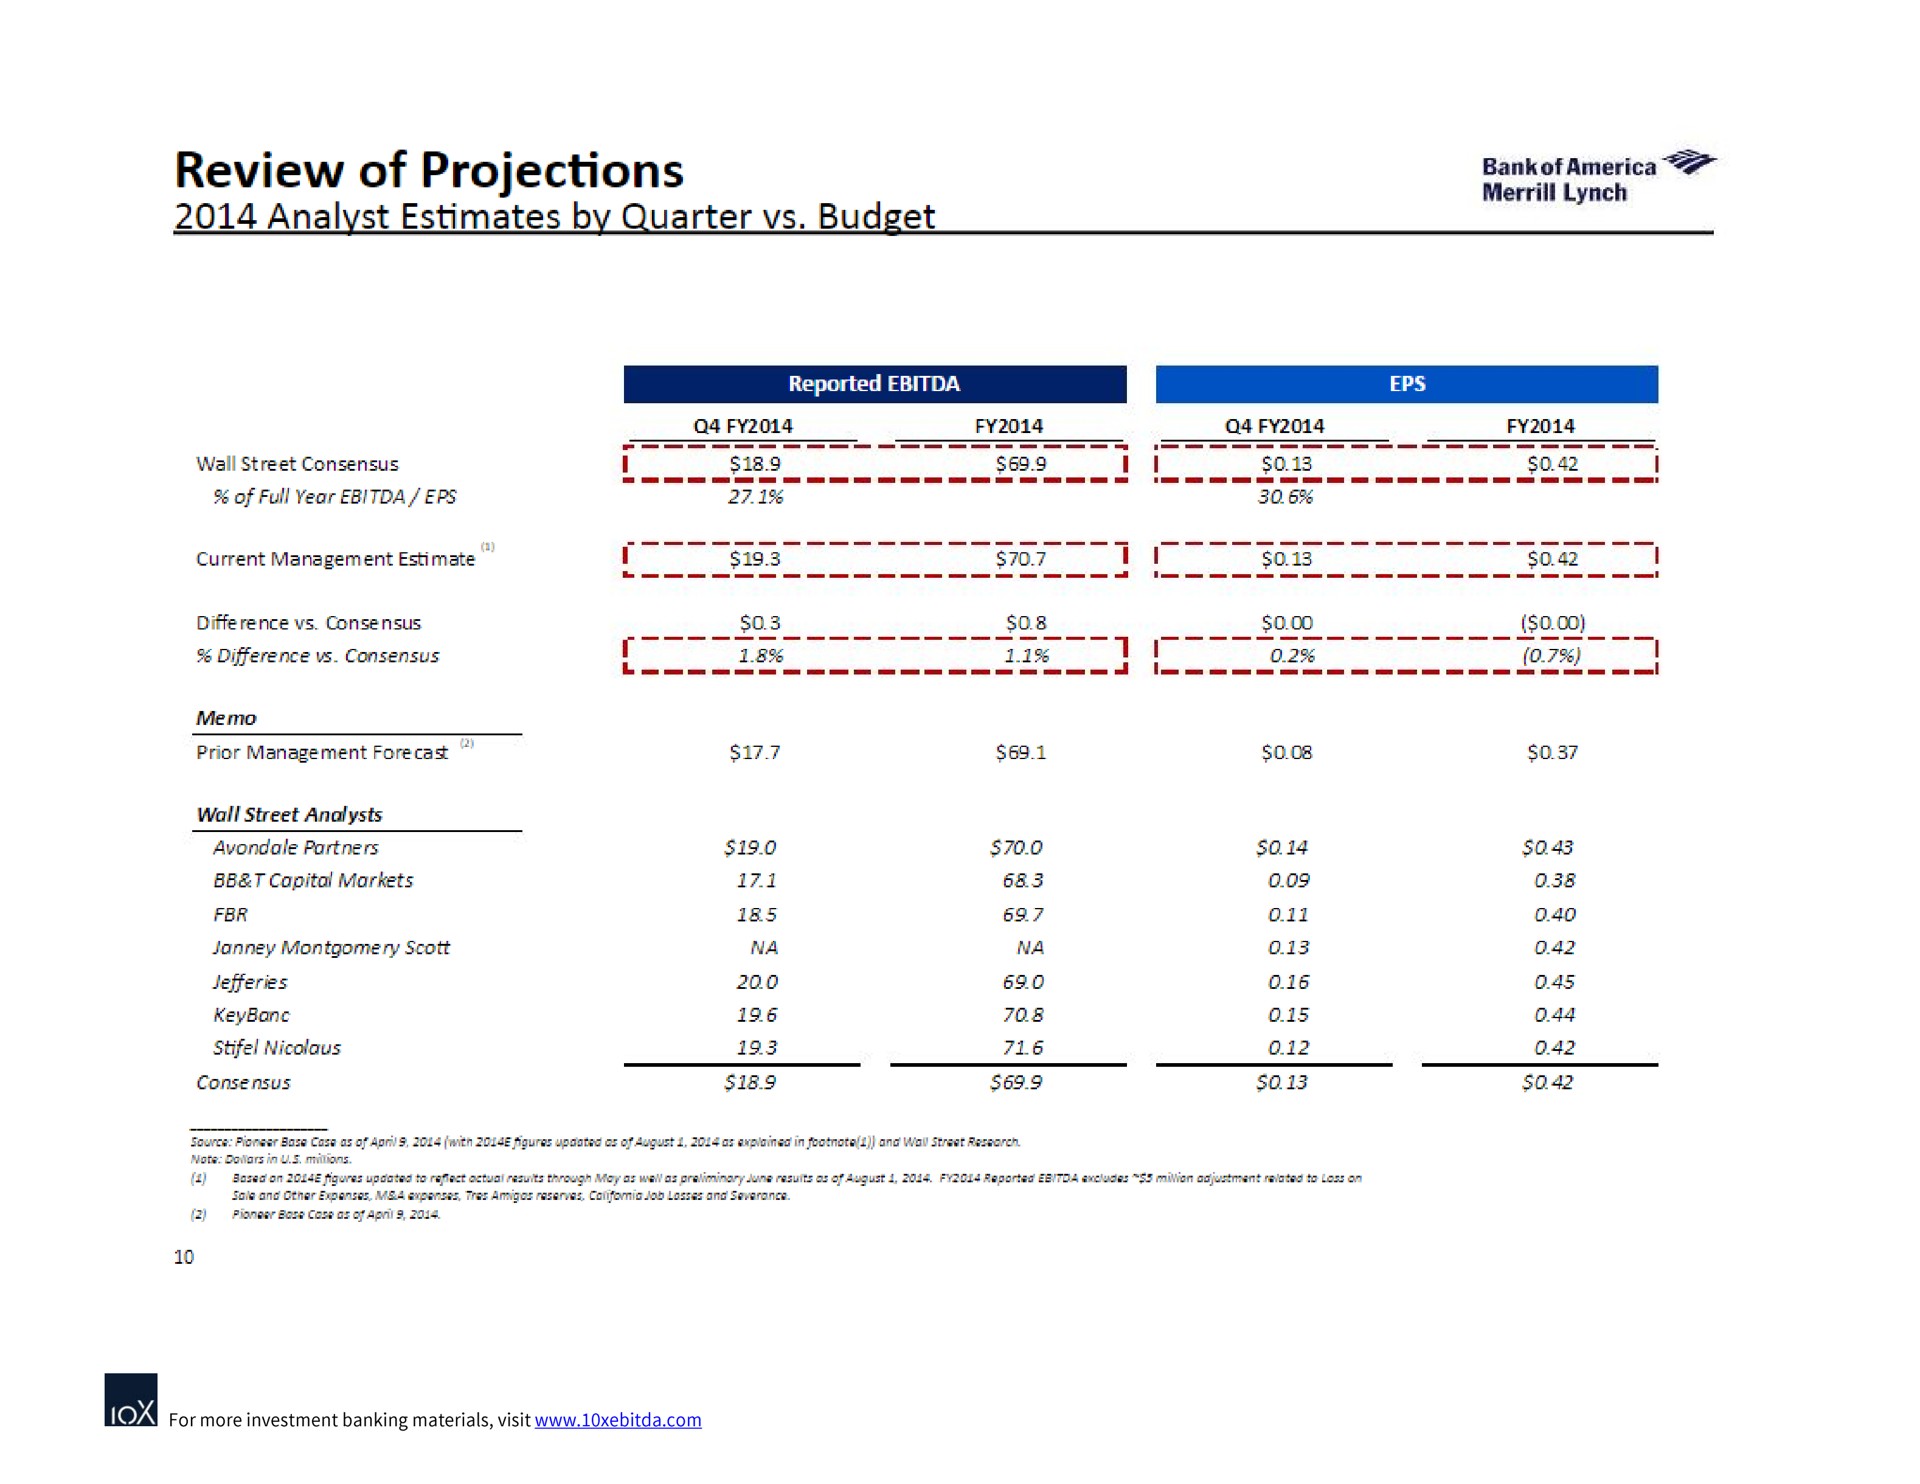 review of projections analyst estimates by quarter budget | Bank of America